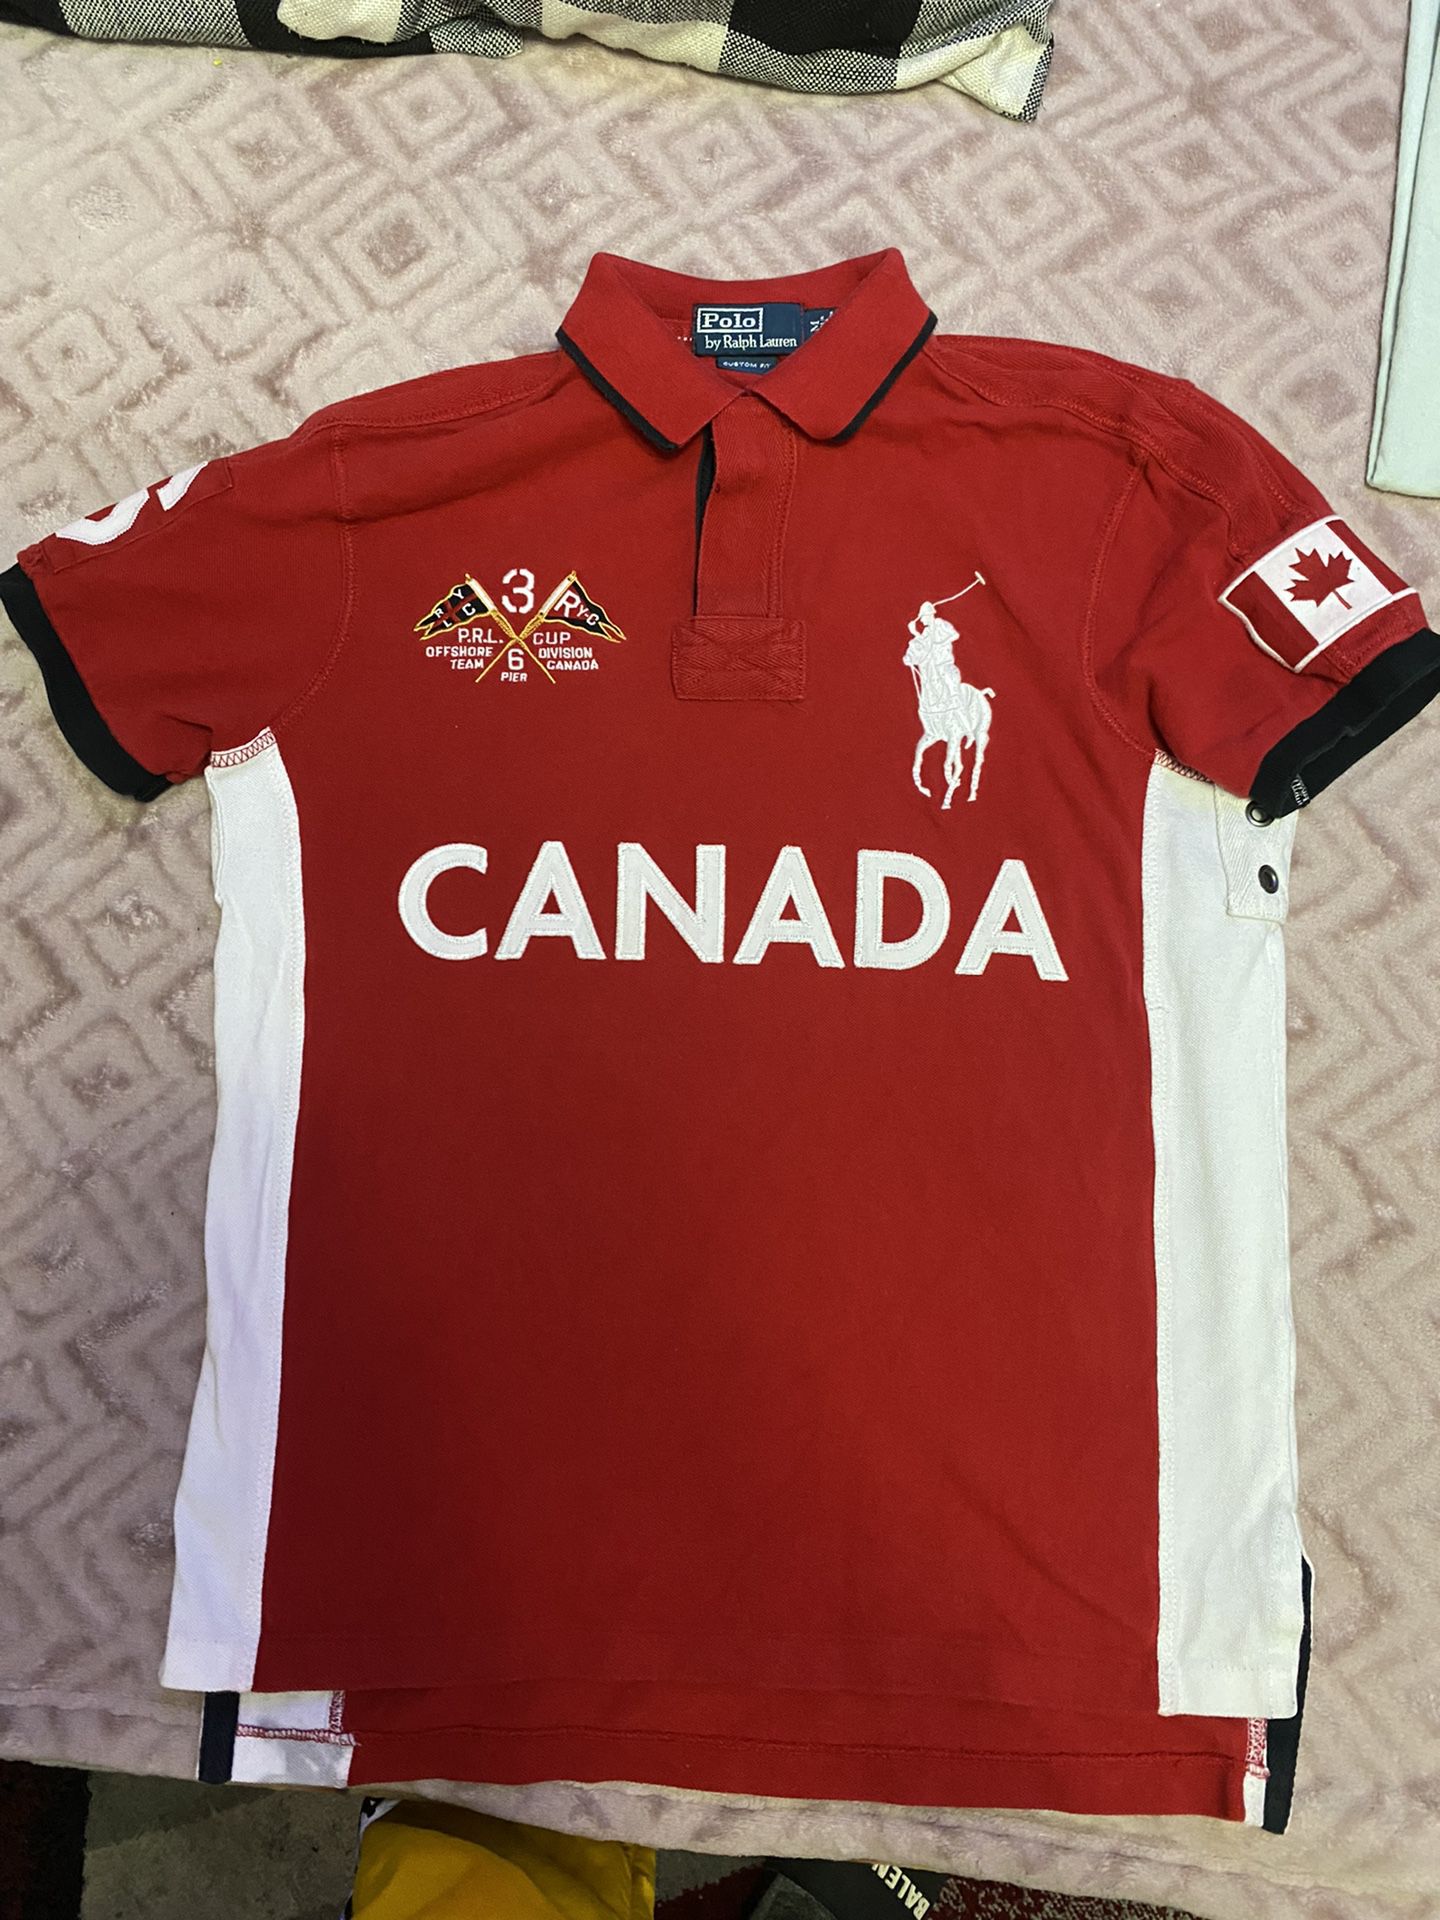 Polo Ralph Lauren Canada Shirt Size M for Sale in Brooklyn, NY - OfferUp